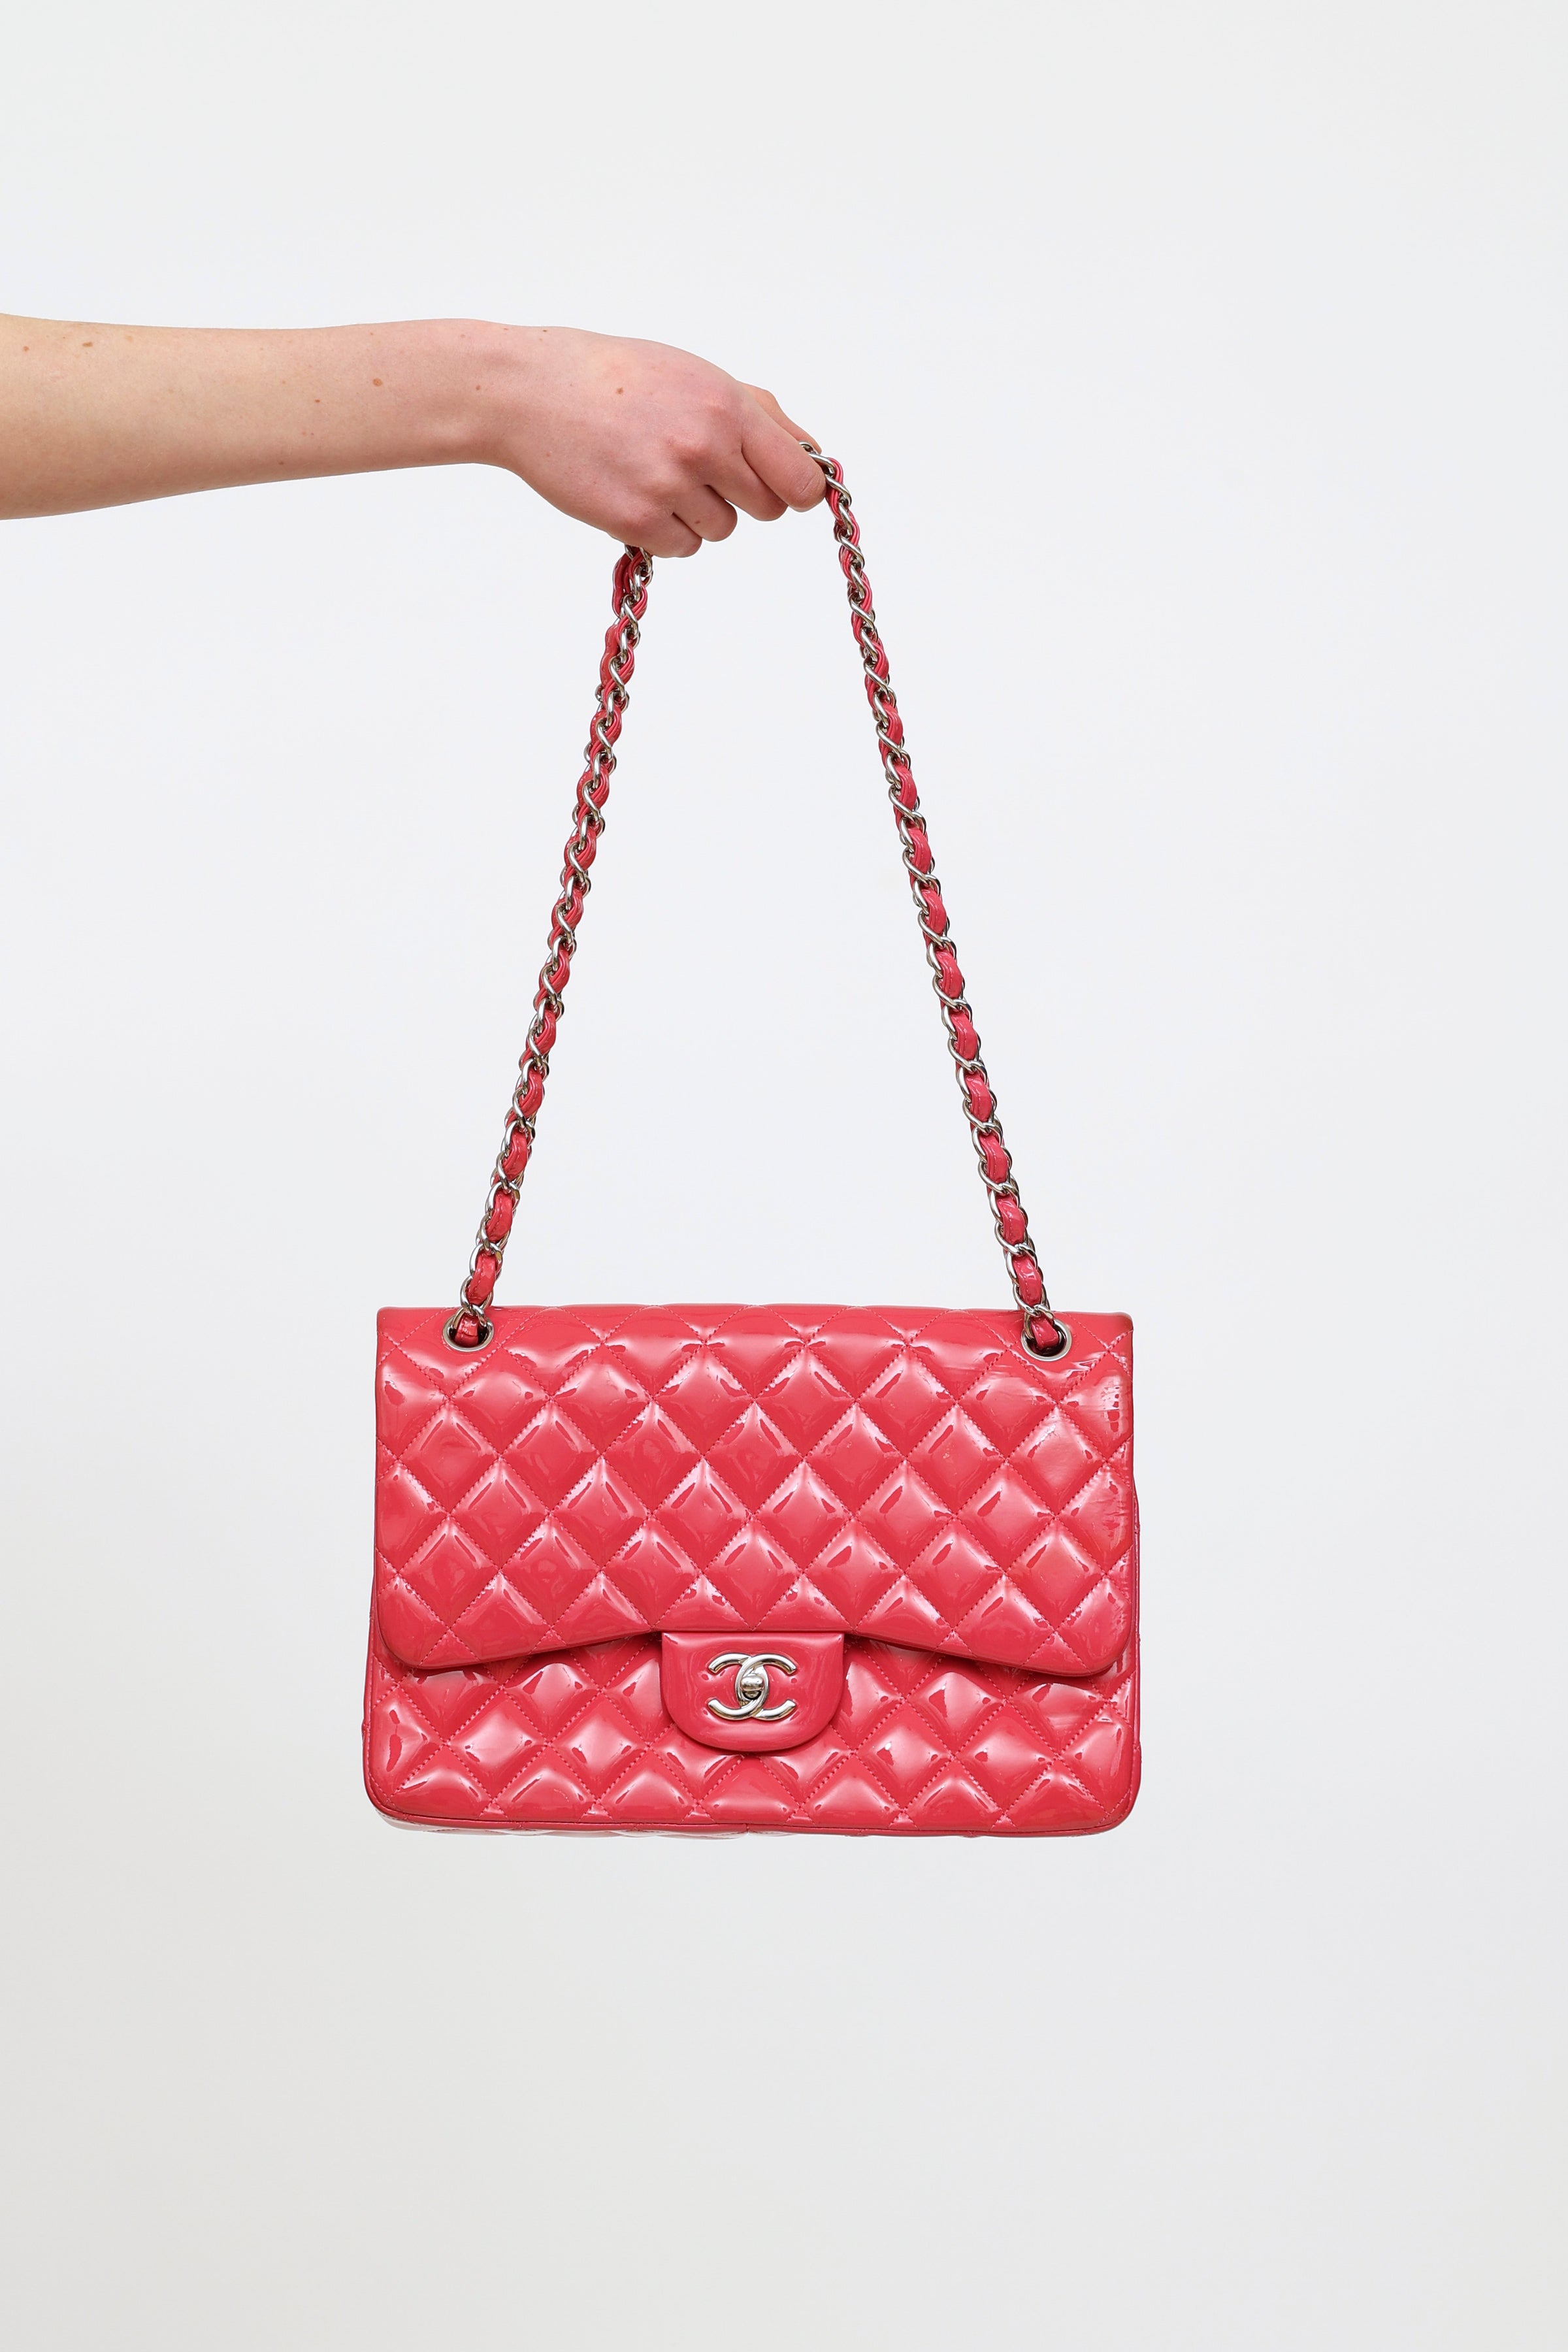 quilted leather chanel purse